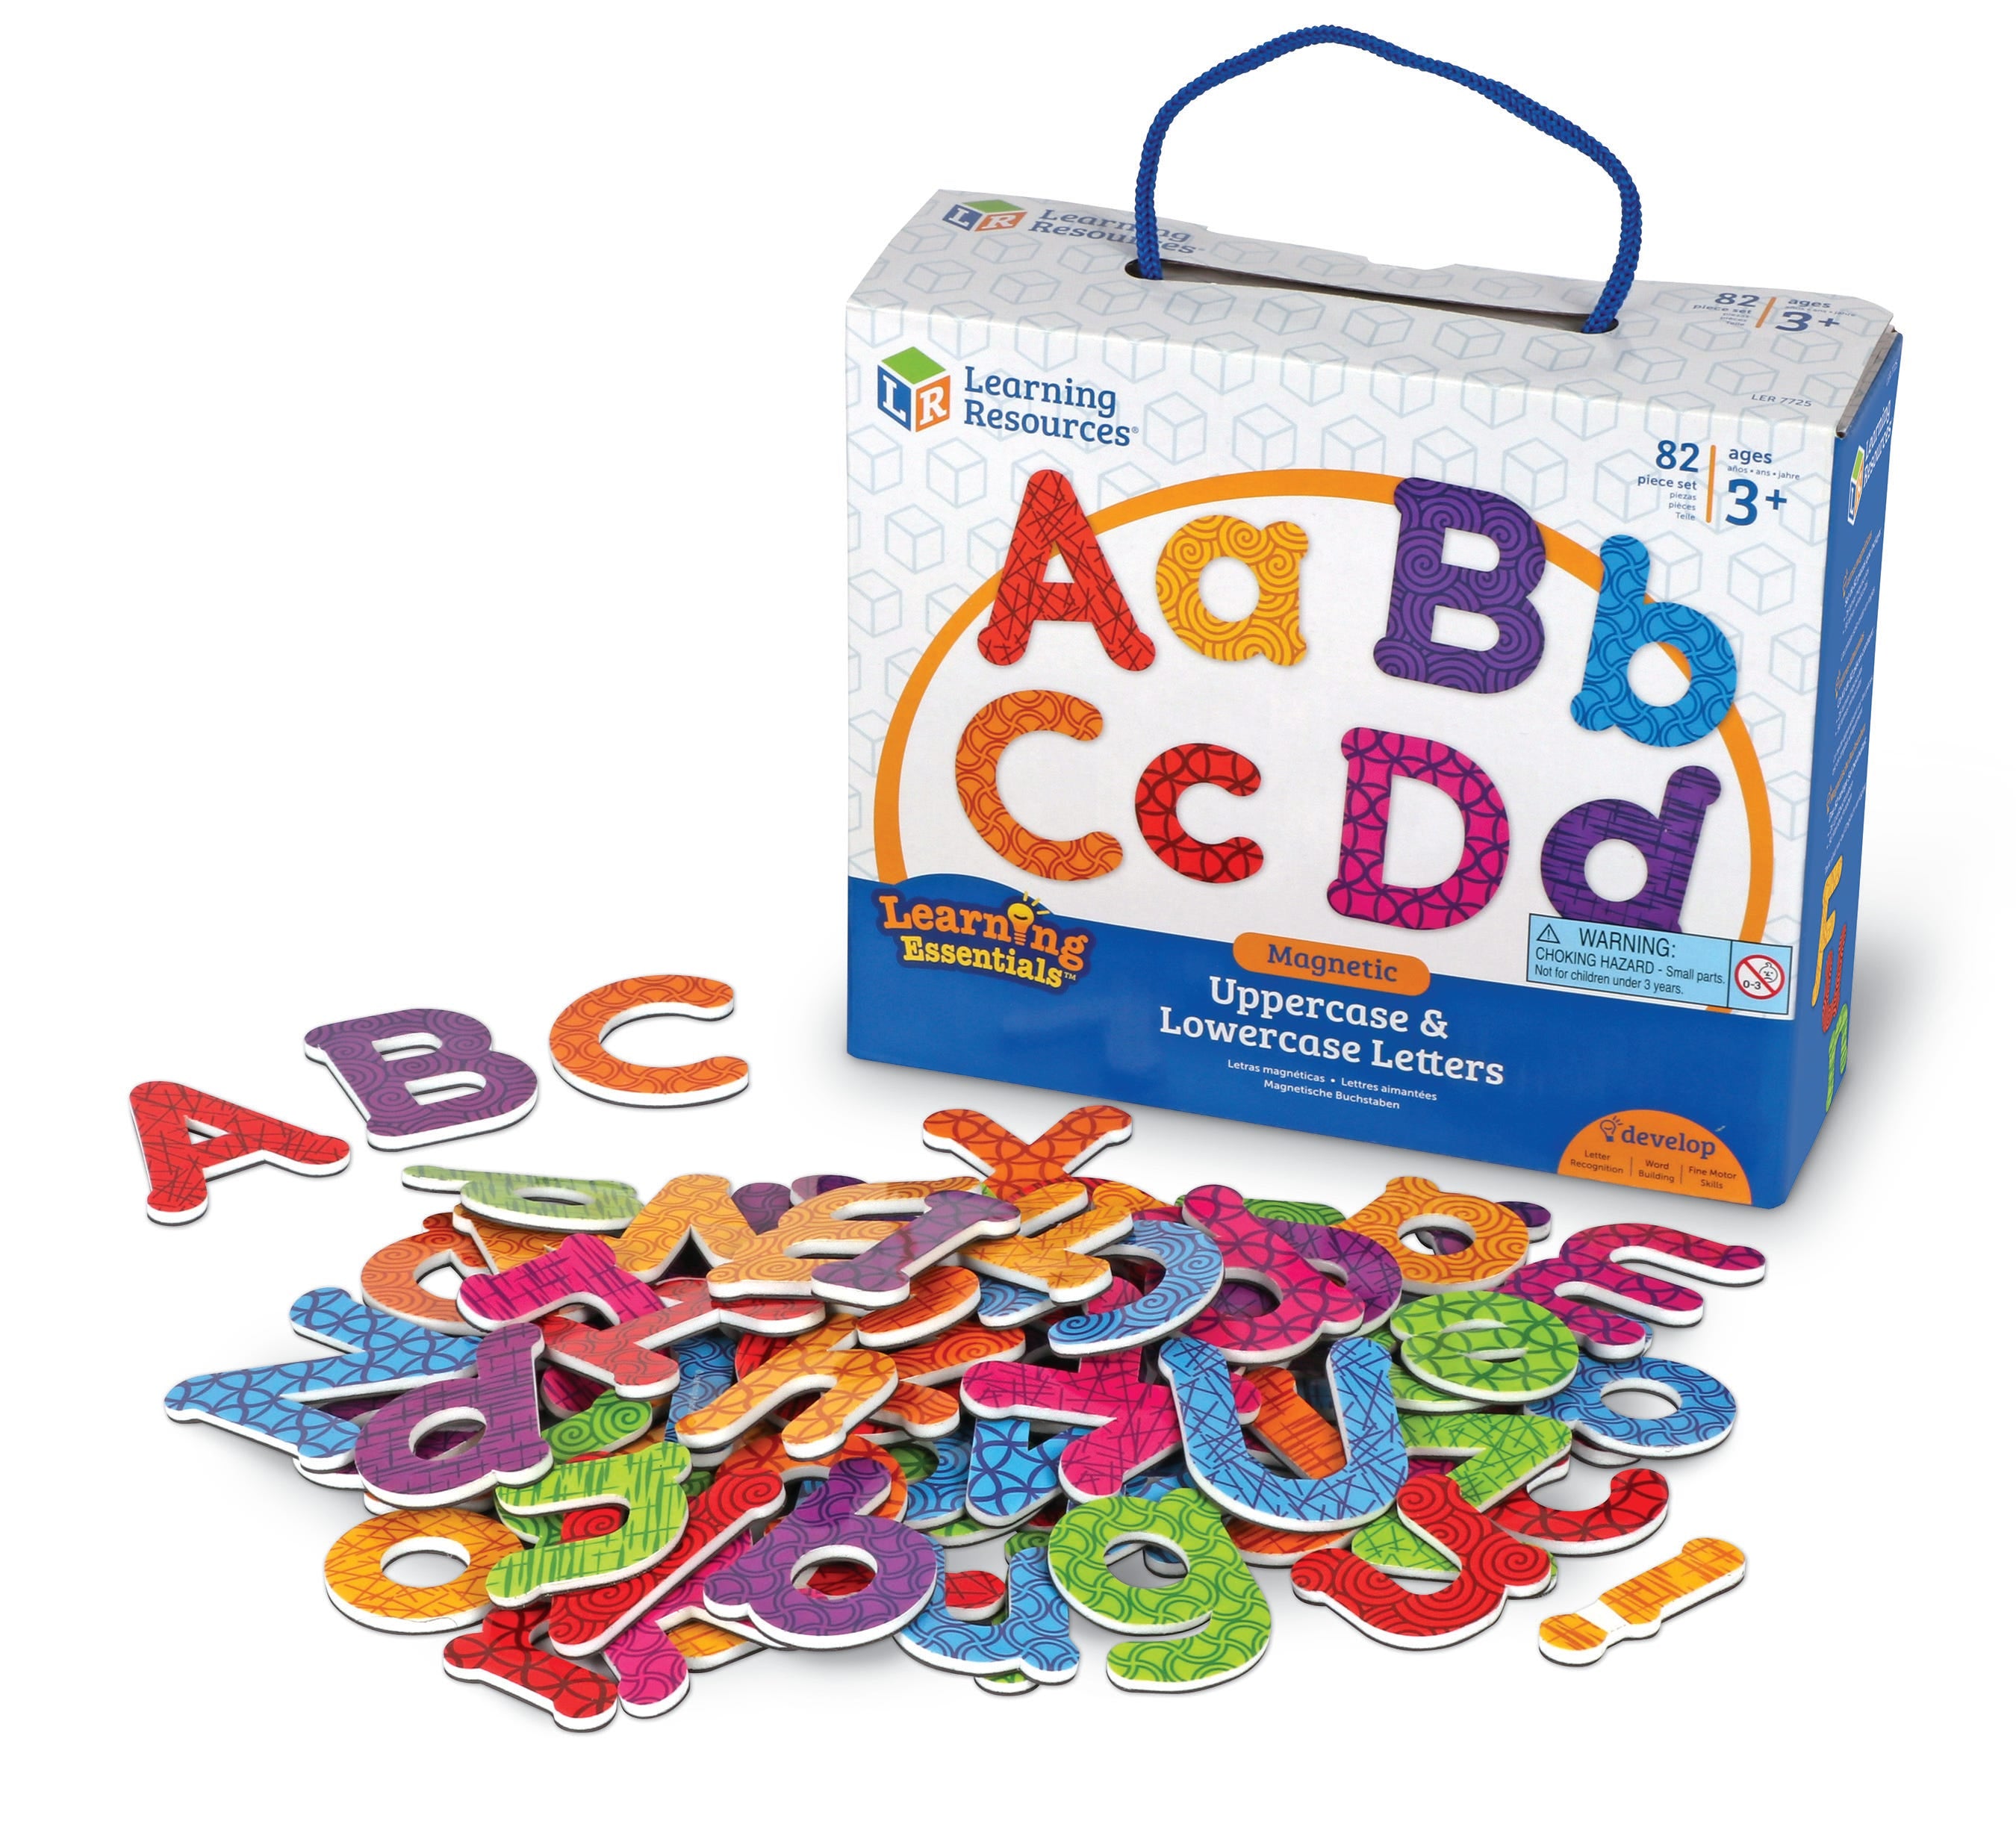 Magnetic Letters Uppercase & Lowercase